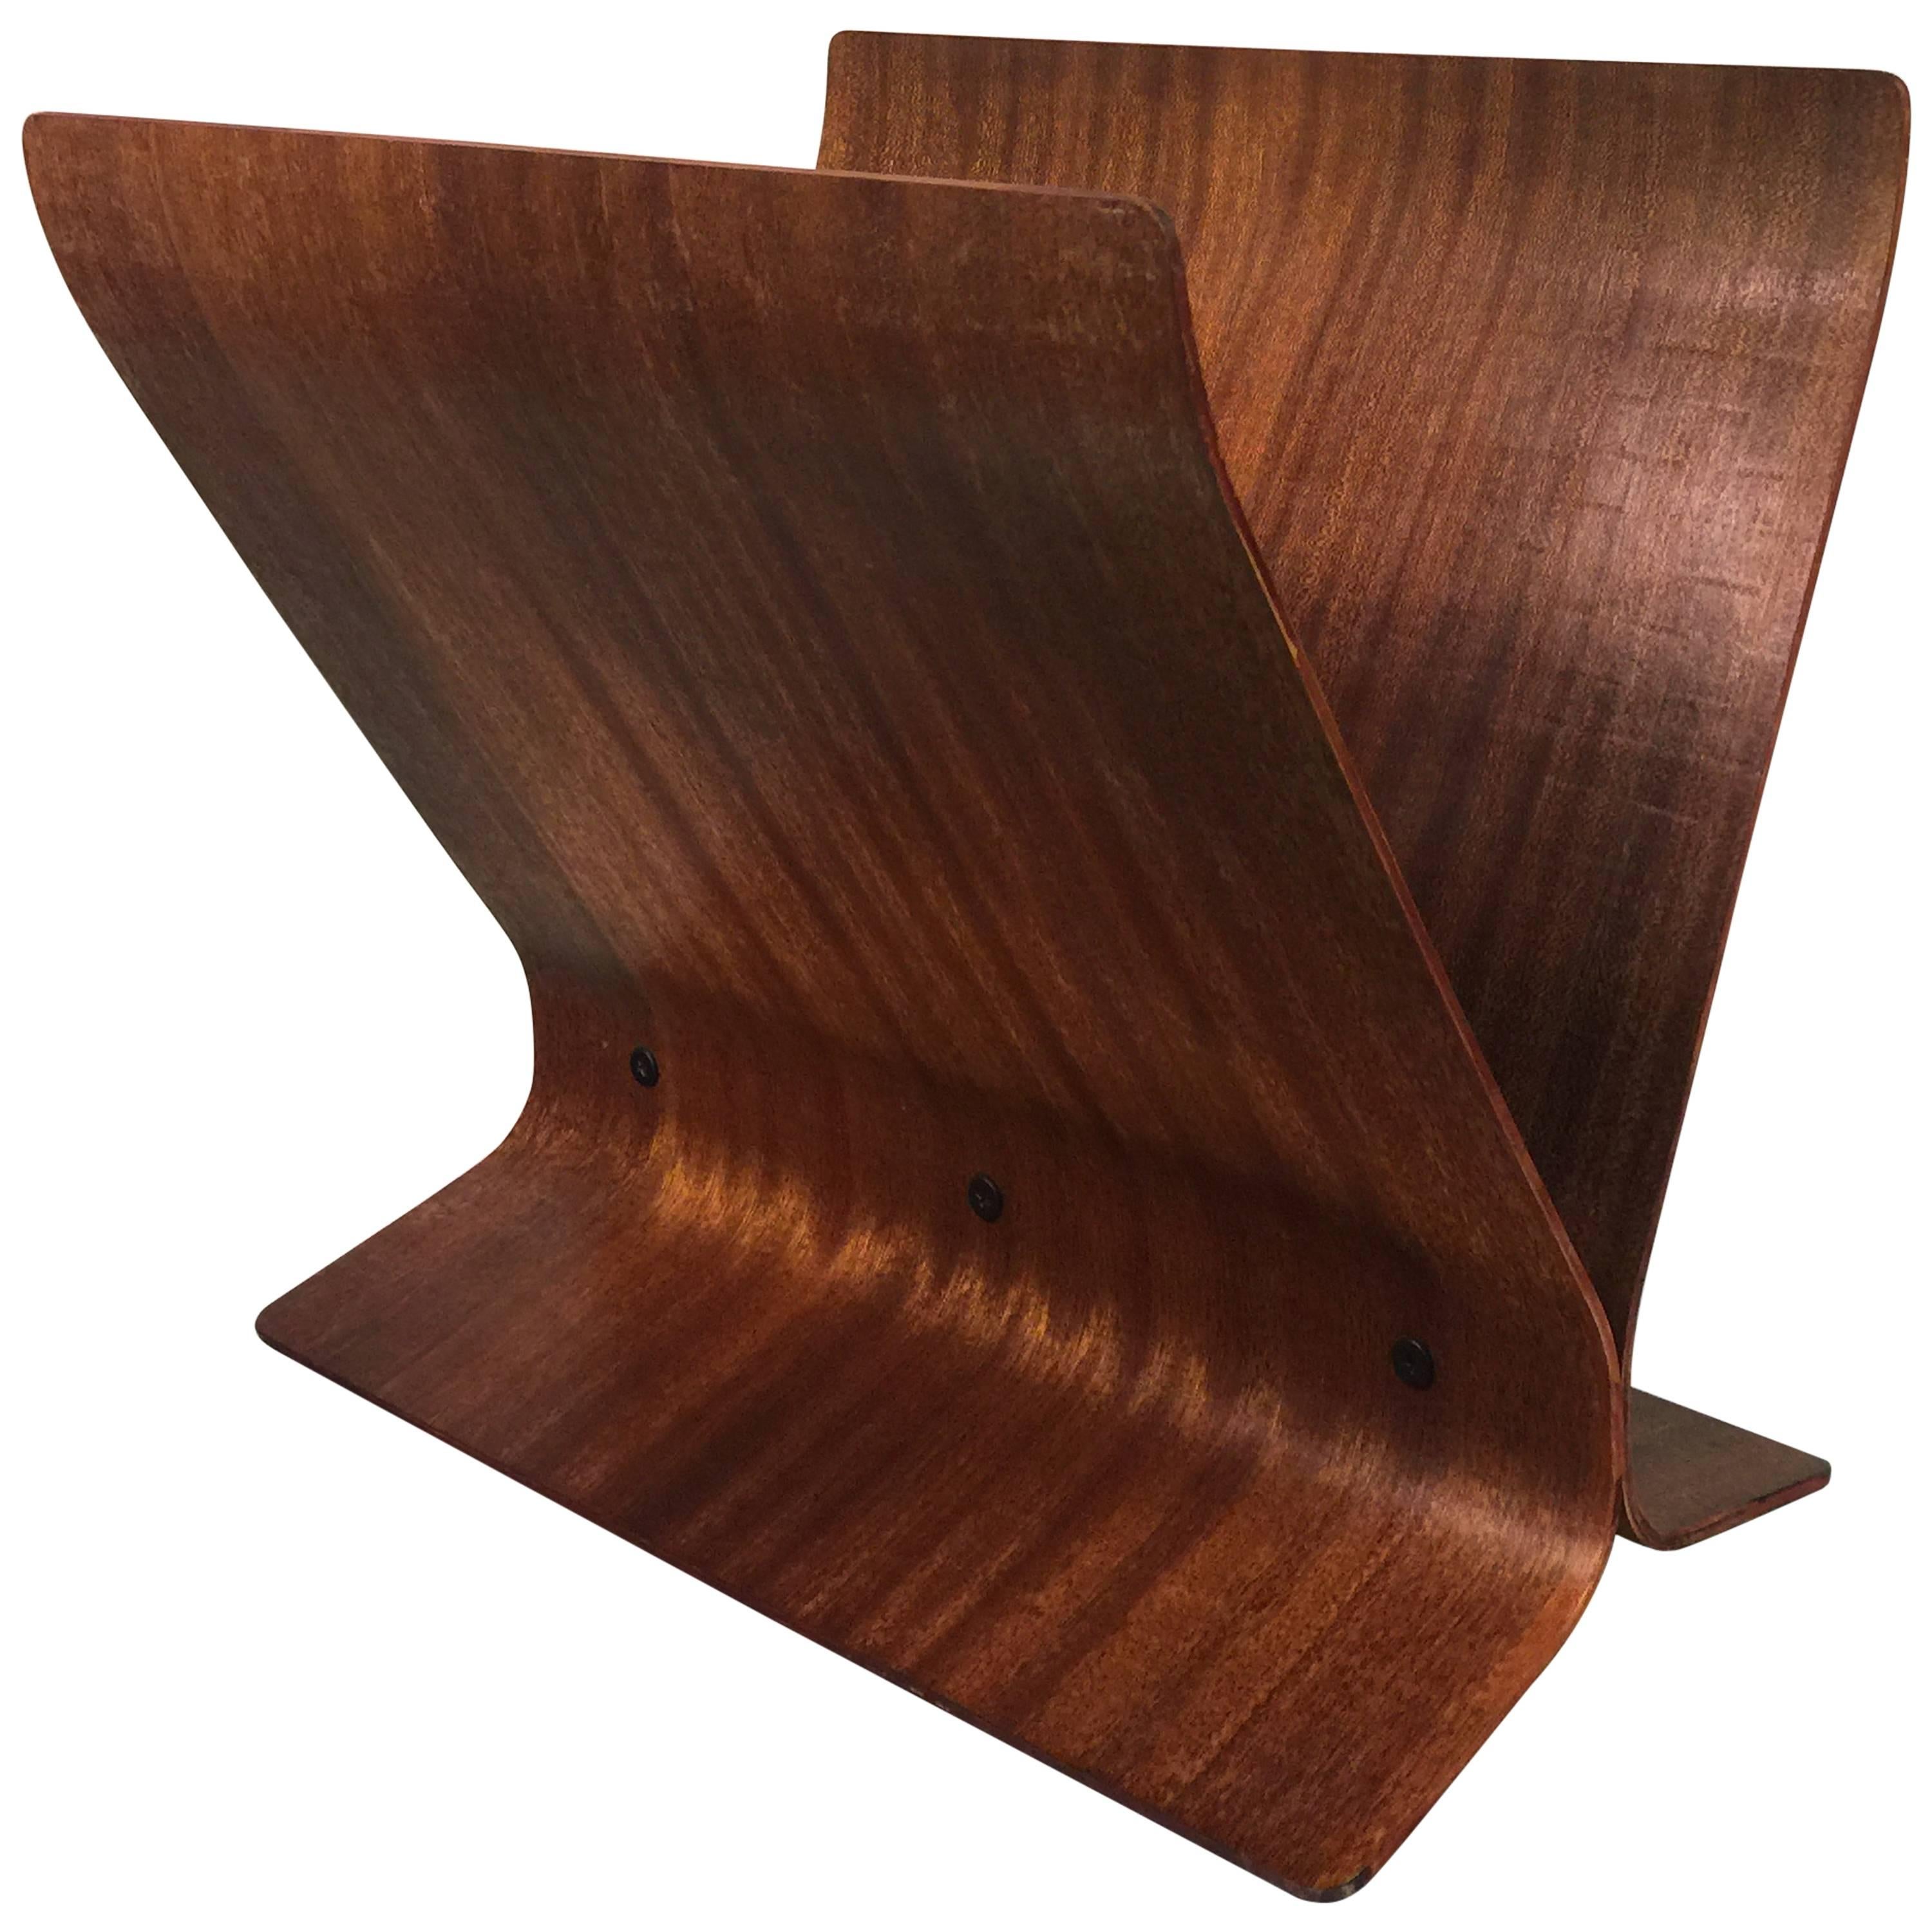 Magnificent Modern Bentwood Magazine Rack by Paul Rowan for Umbra For Sale